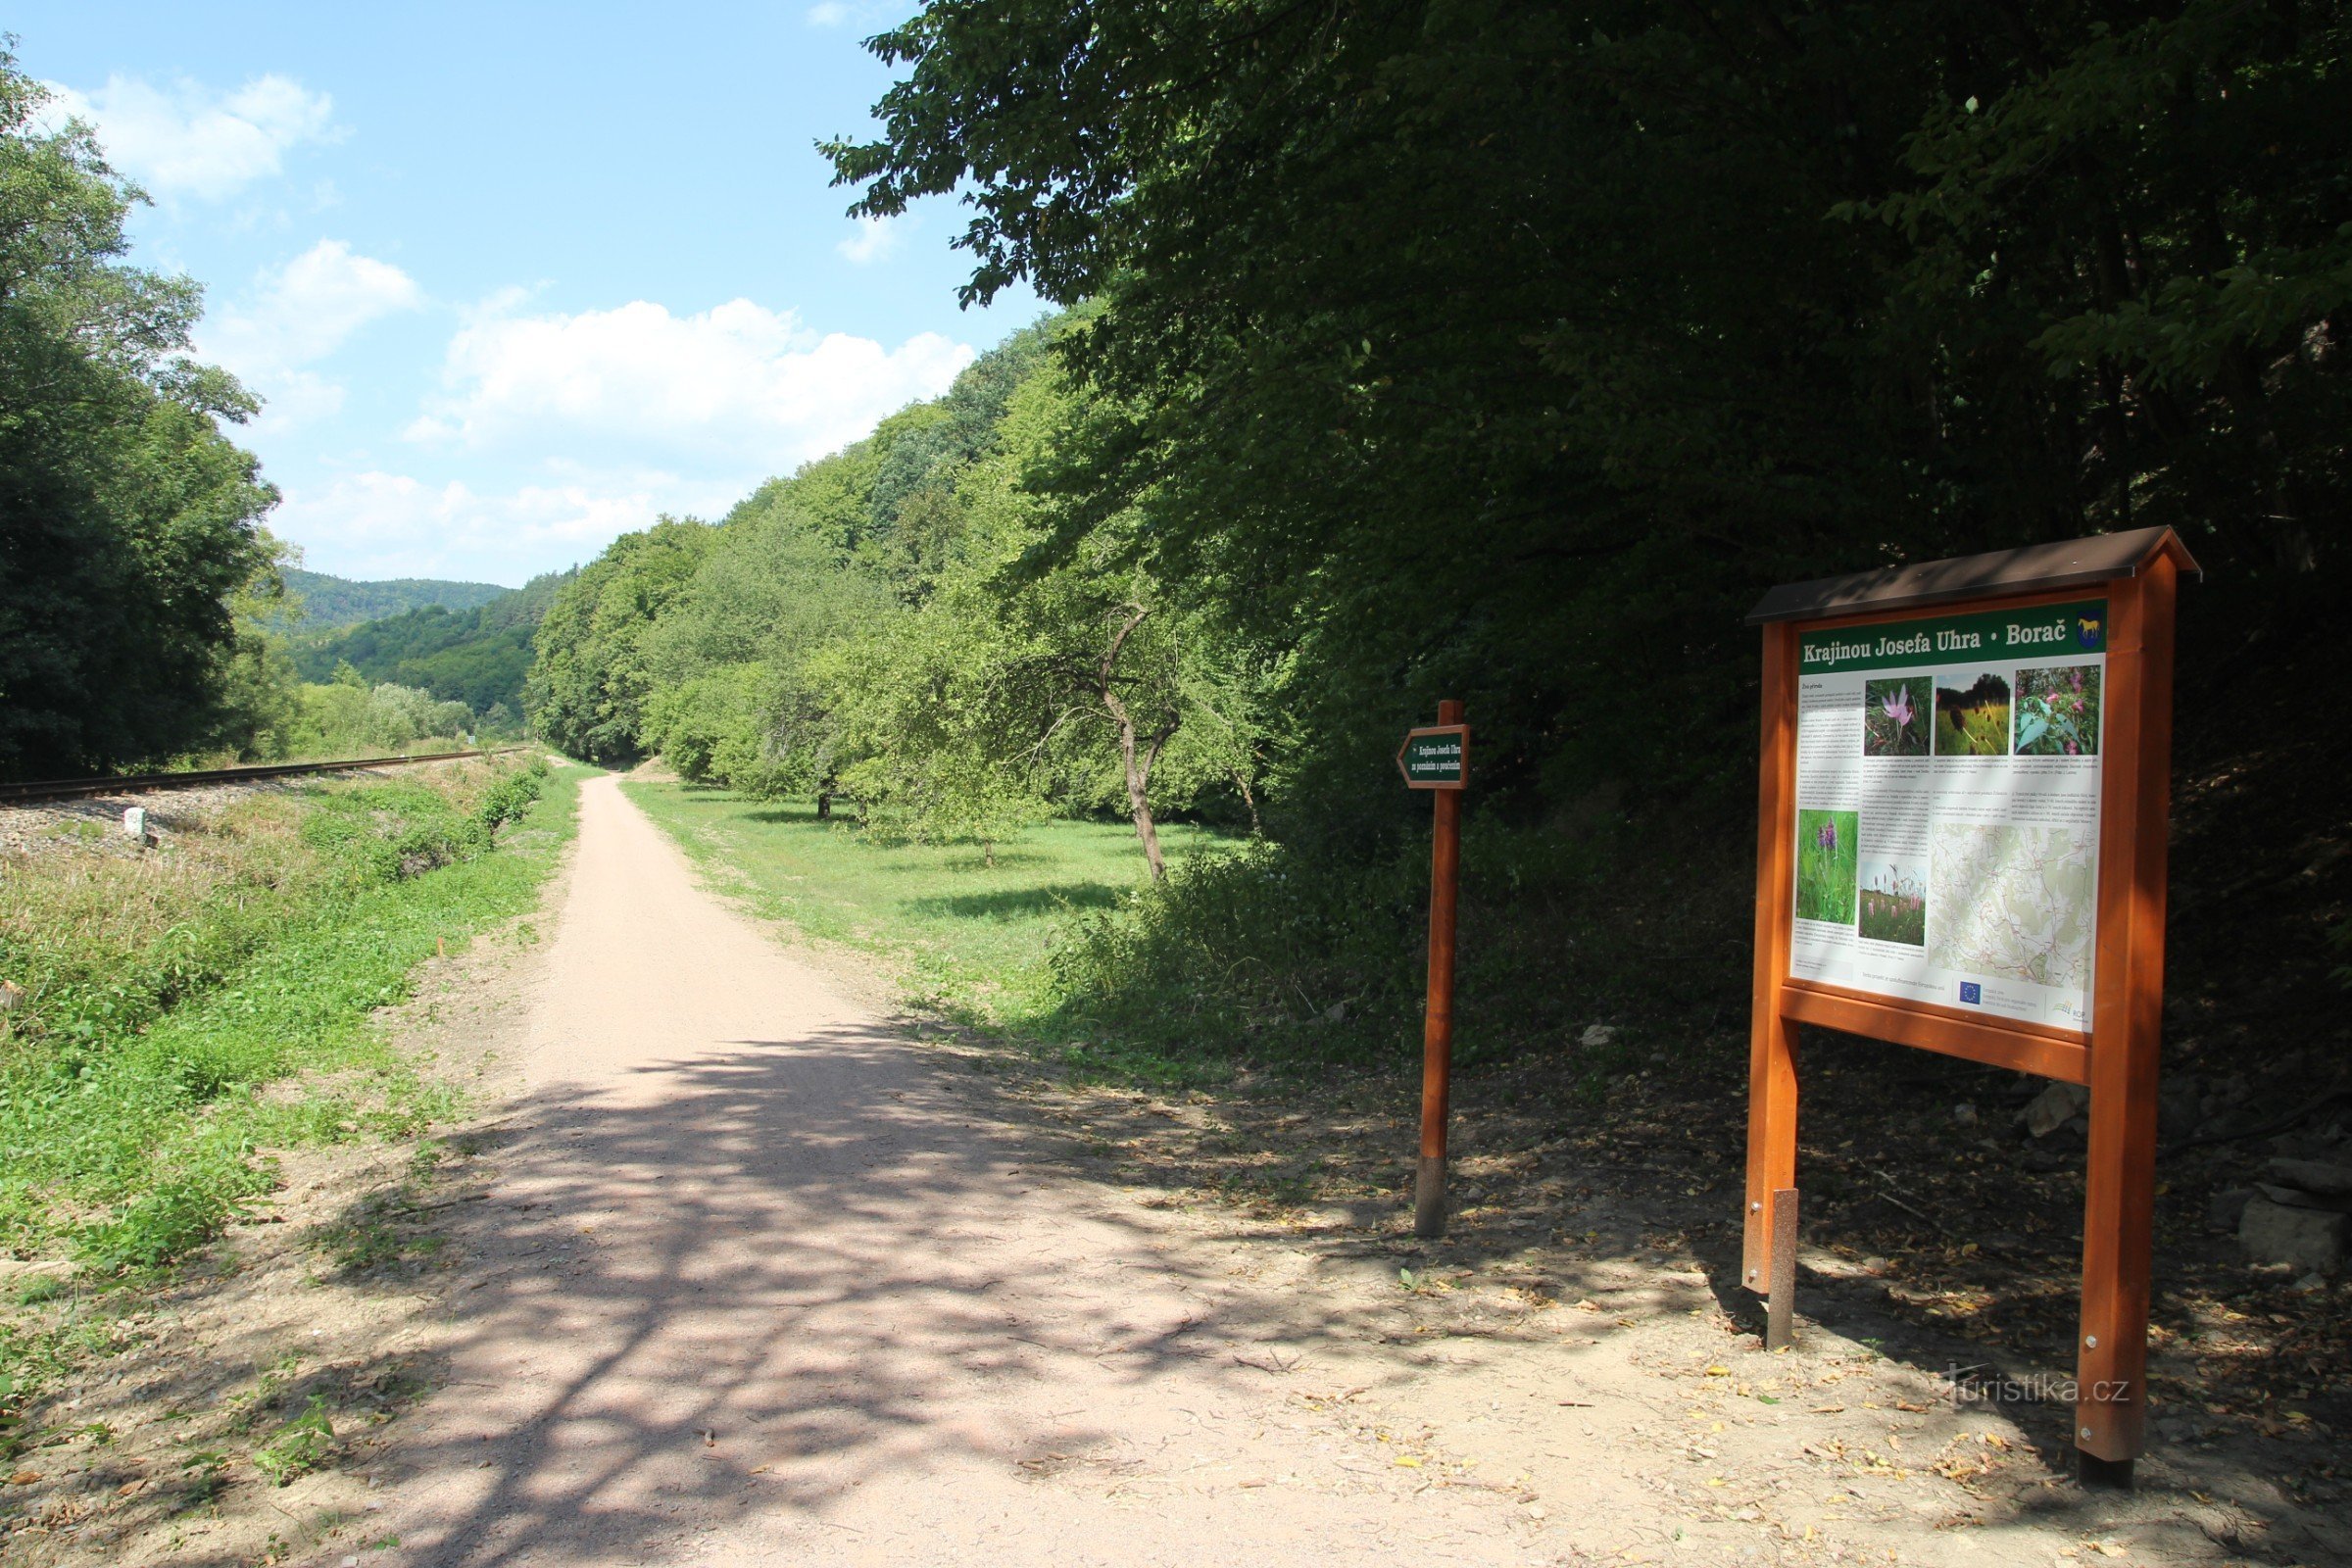 The end of the cycle path with an information board